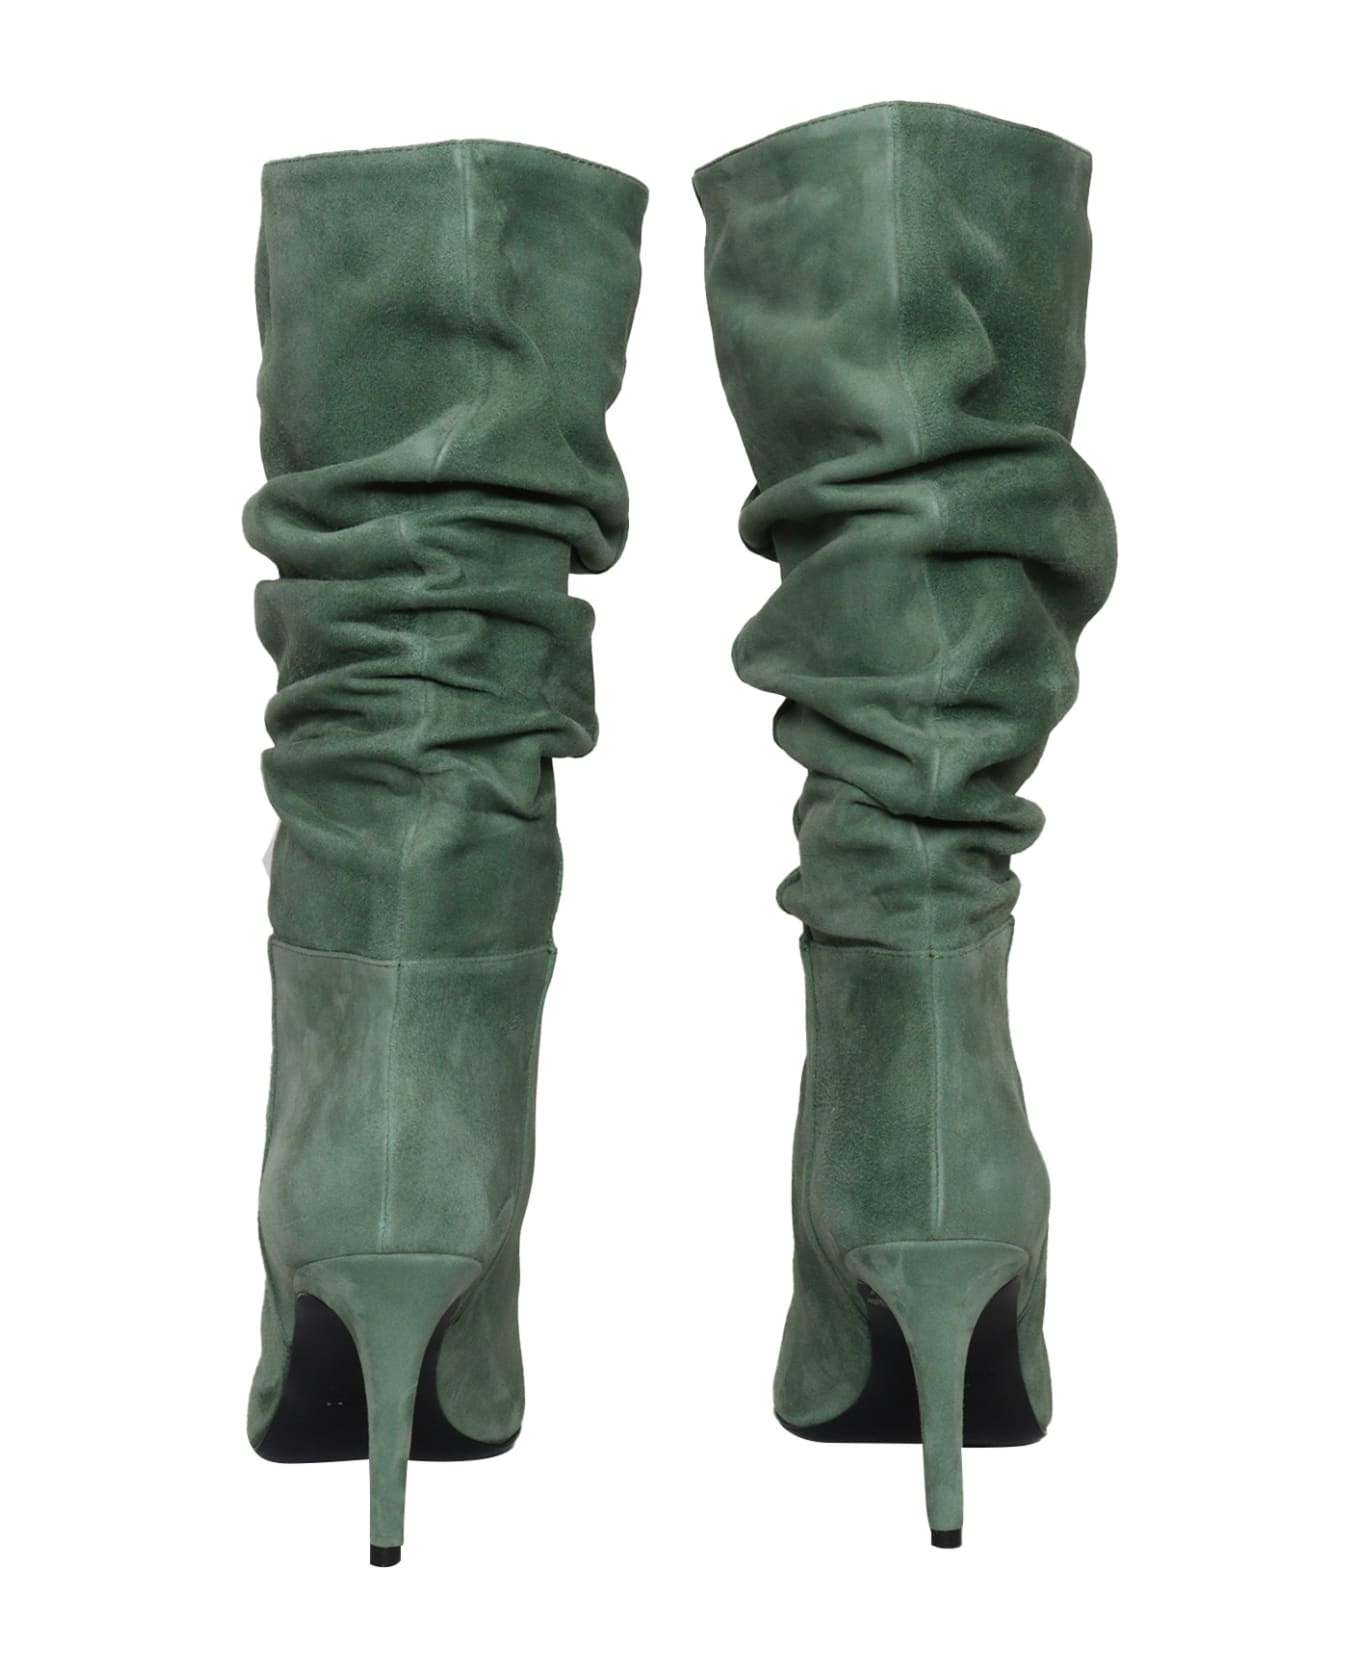 Via Roma 15 Green Curled Boots - GREEN